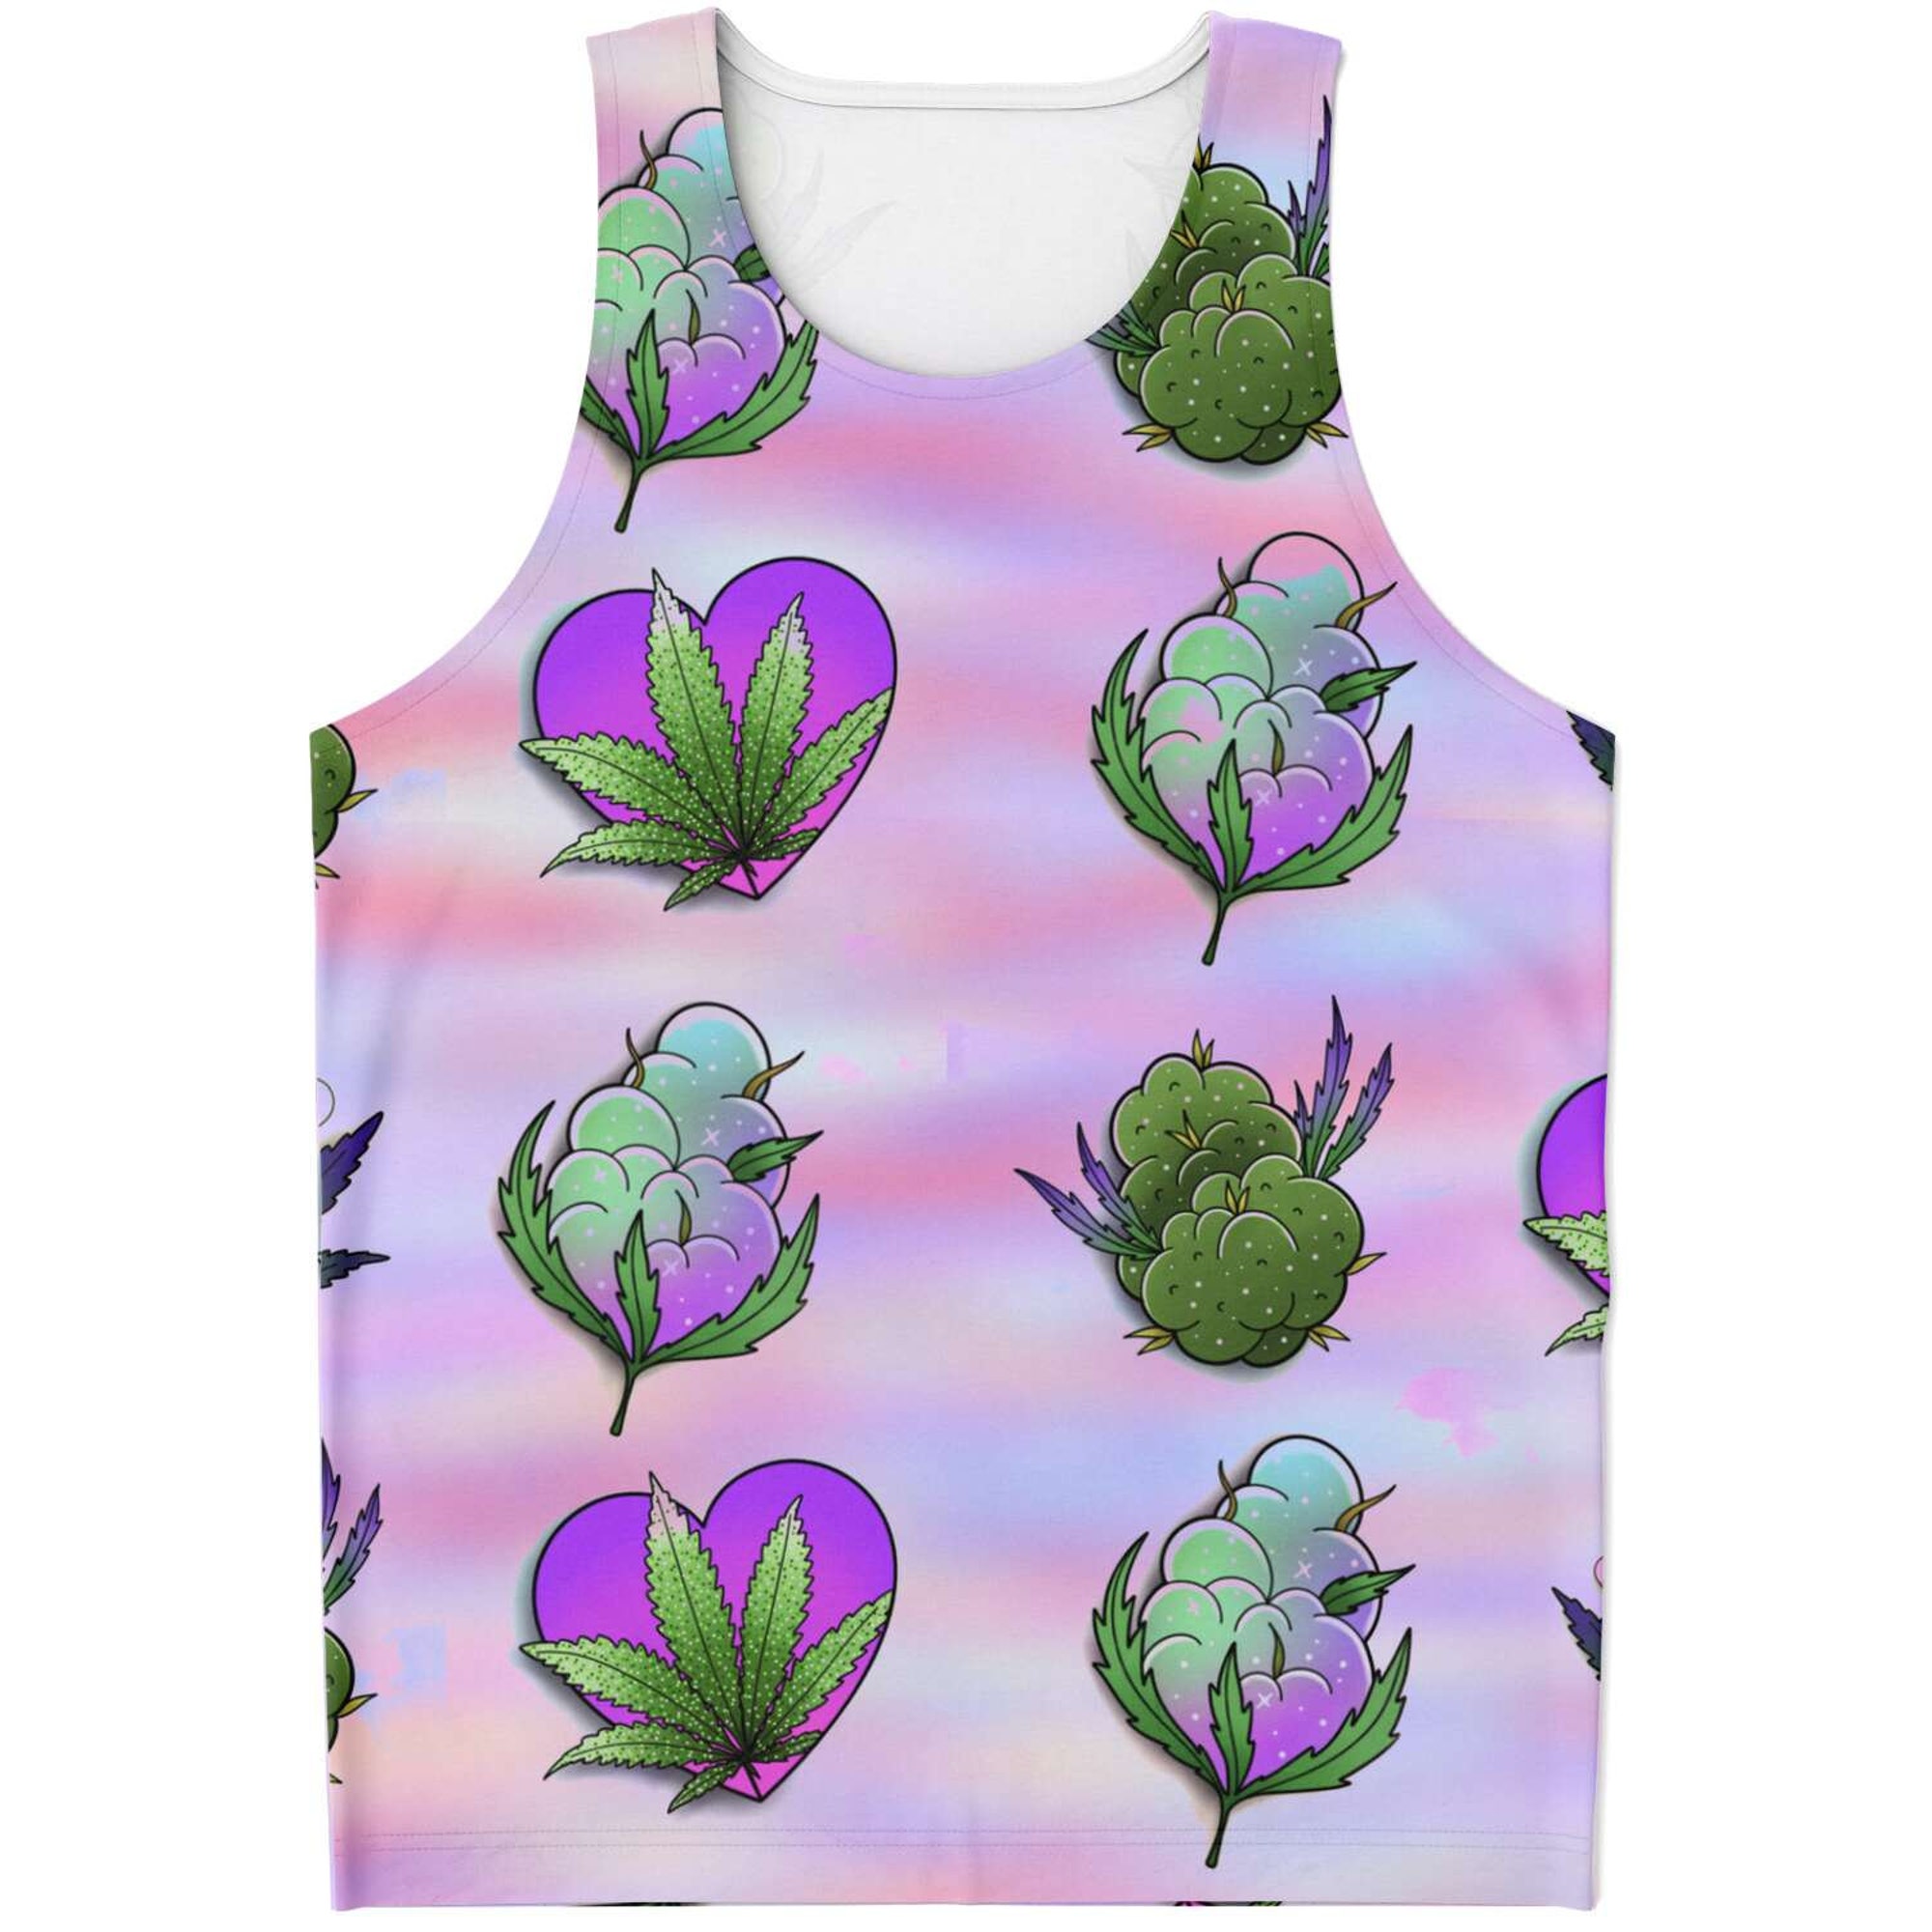 Music Festival Gear Psychedelic Rave 3D Tank Top